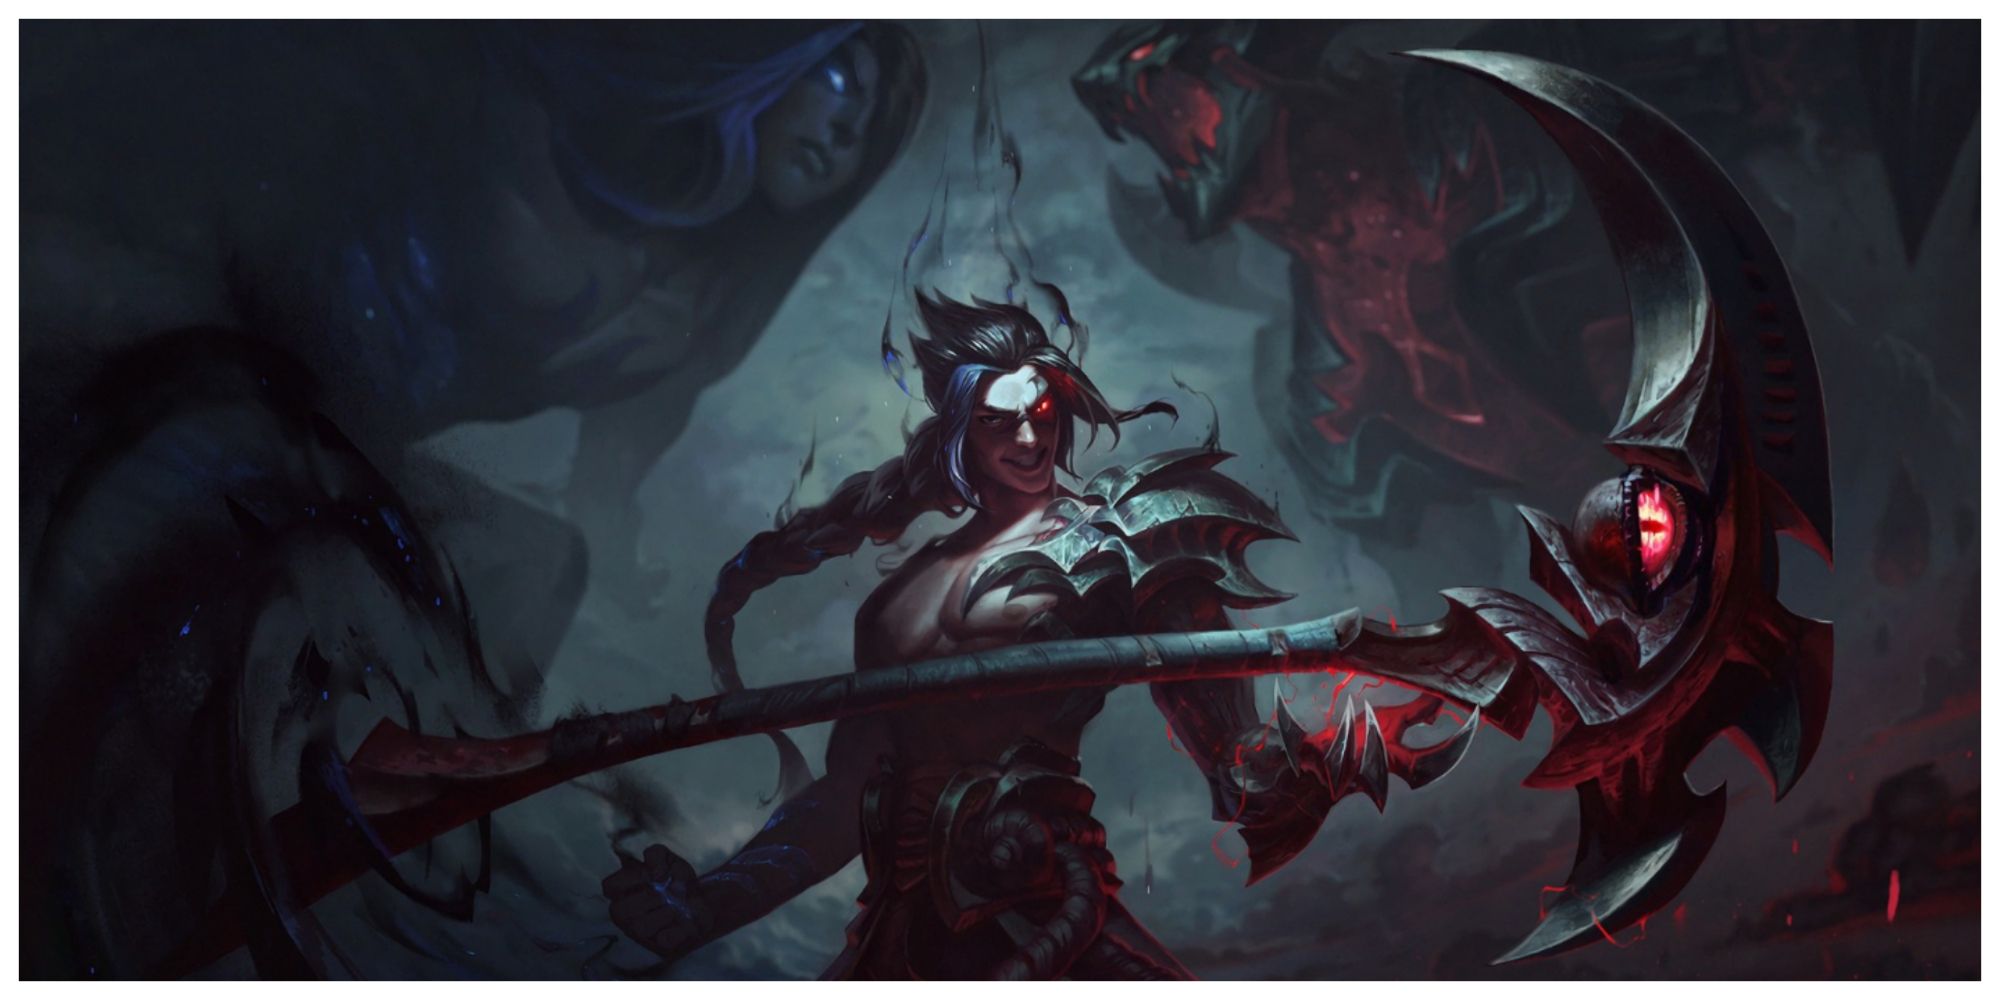 Kayn The Shadow Reaper standing with his Darkin weapon Rhaast his Darkin and Shadow Assassin forms above him as he grins